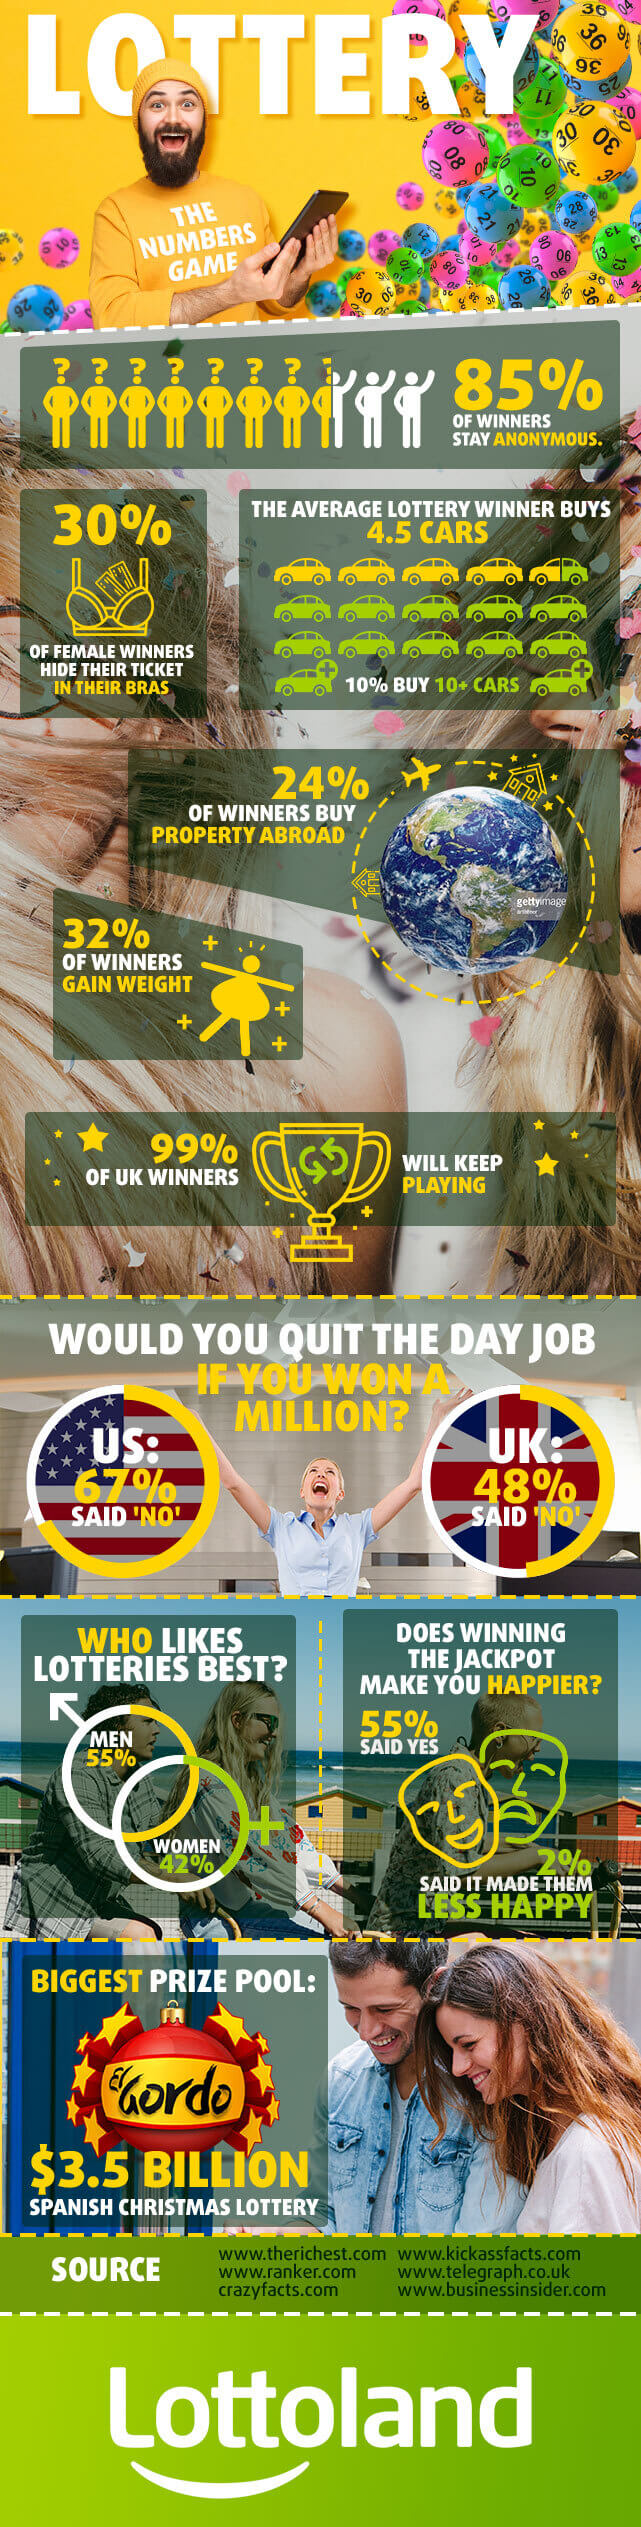 Infographic showing 40 fascinating lottery facts and figures